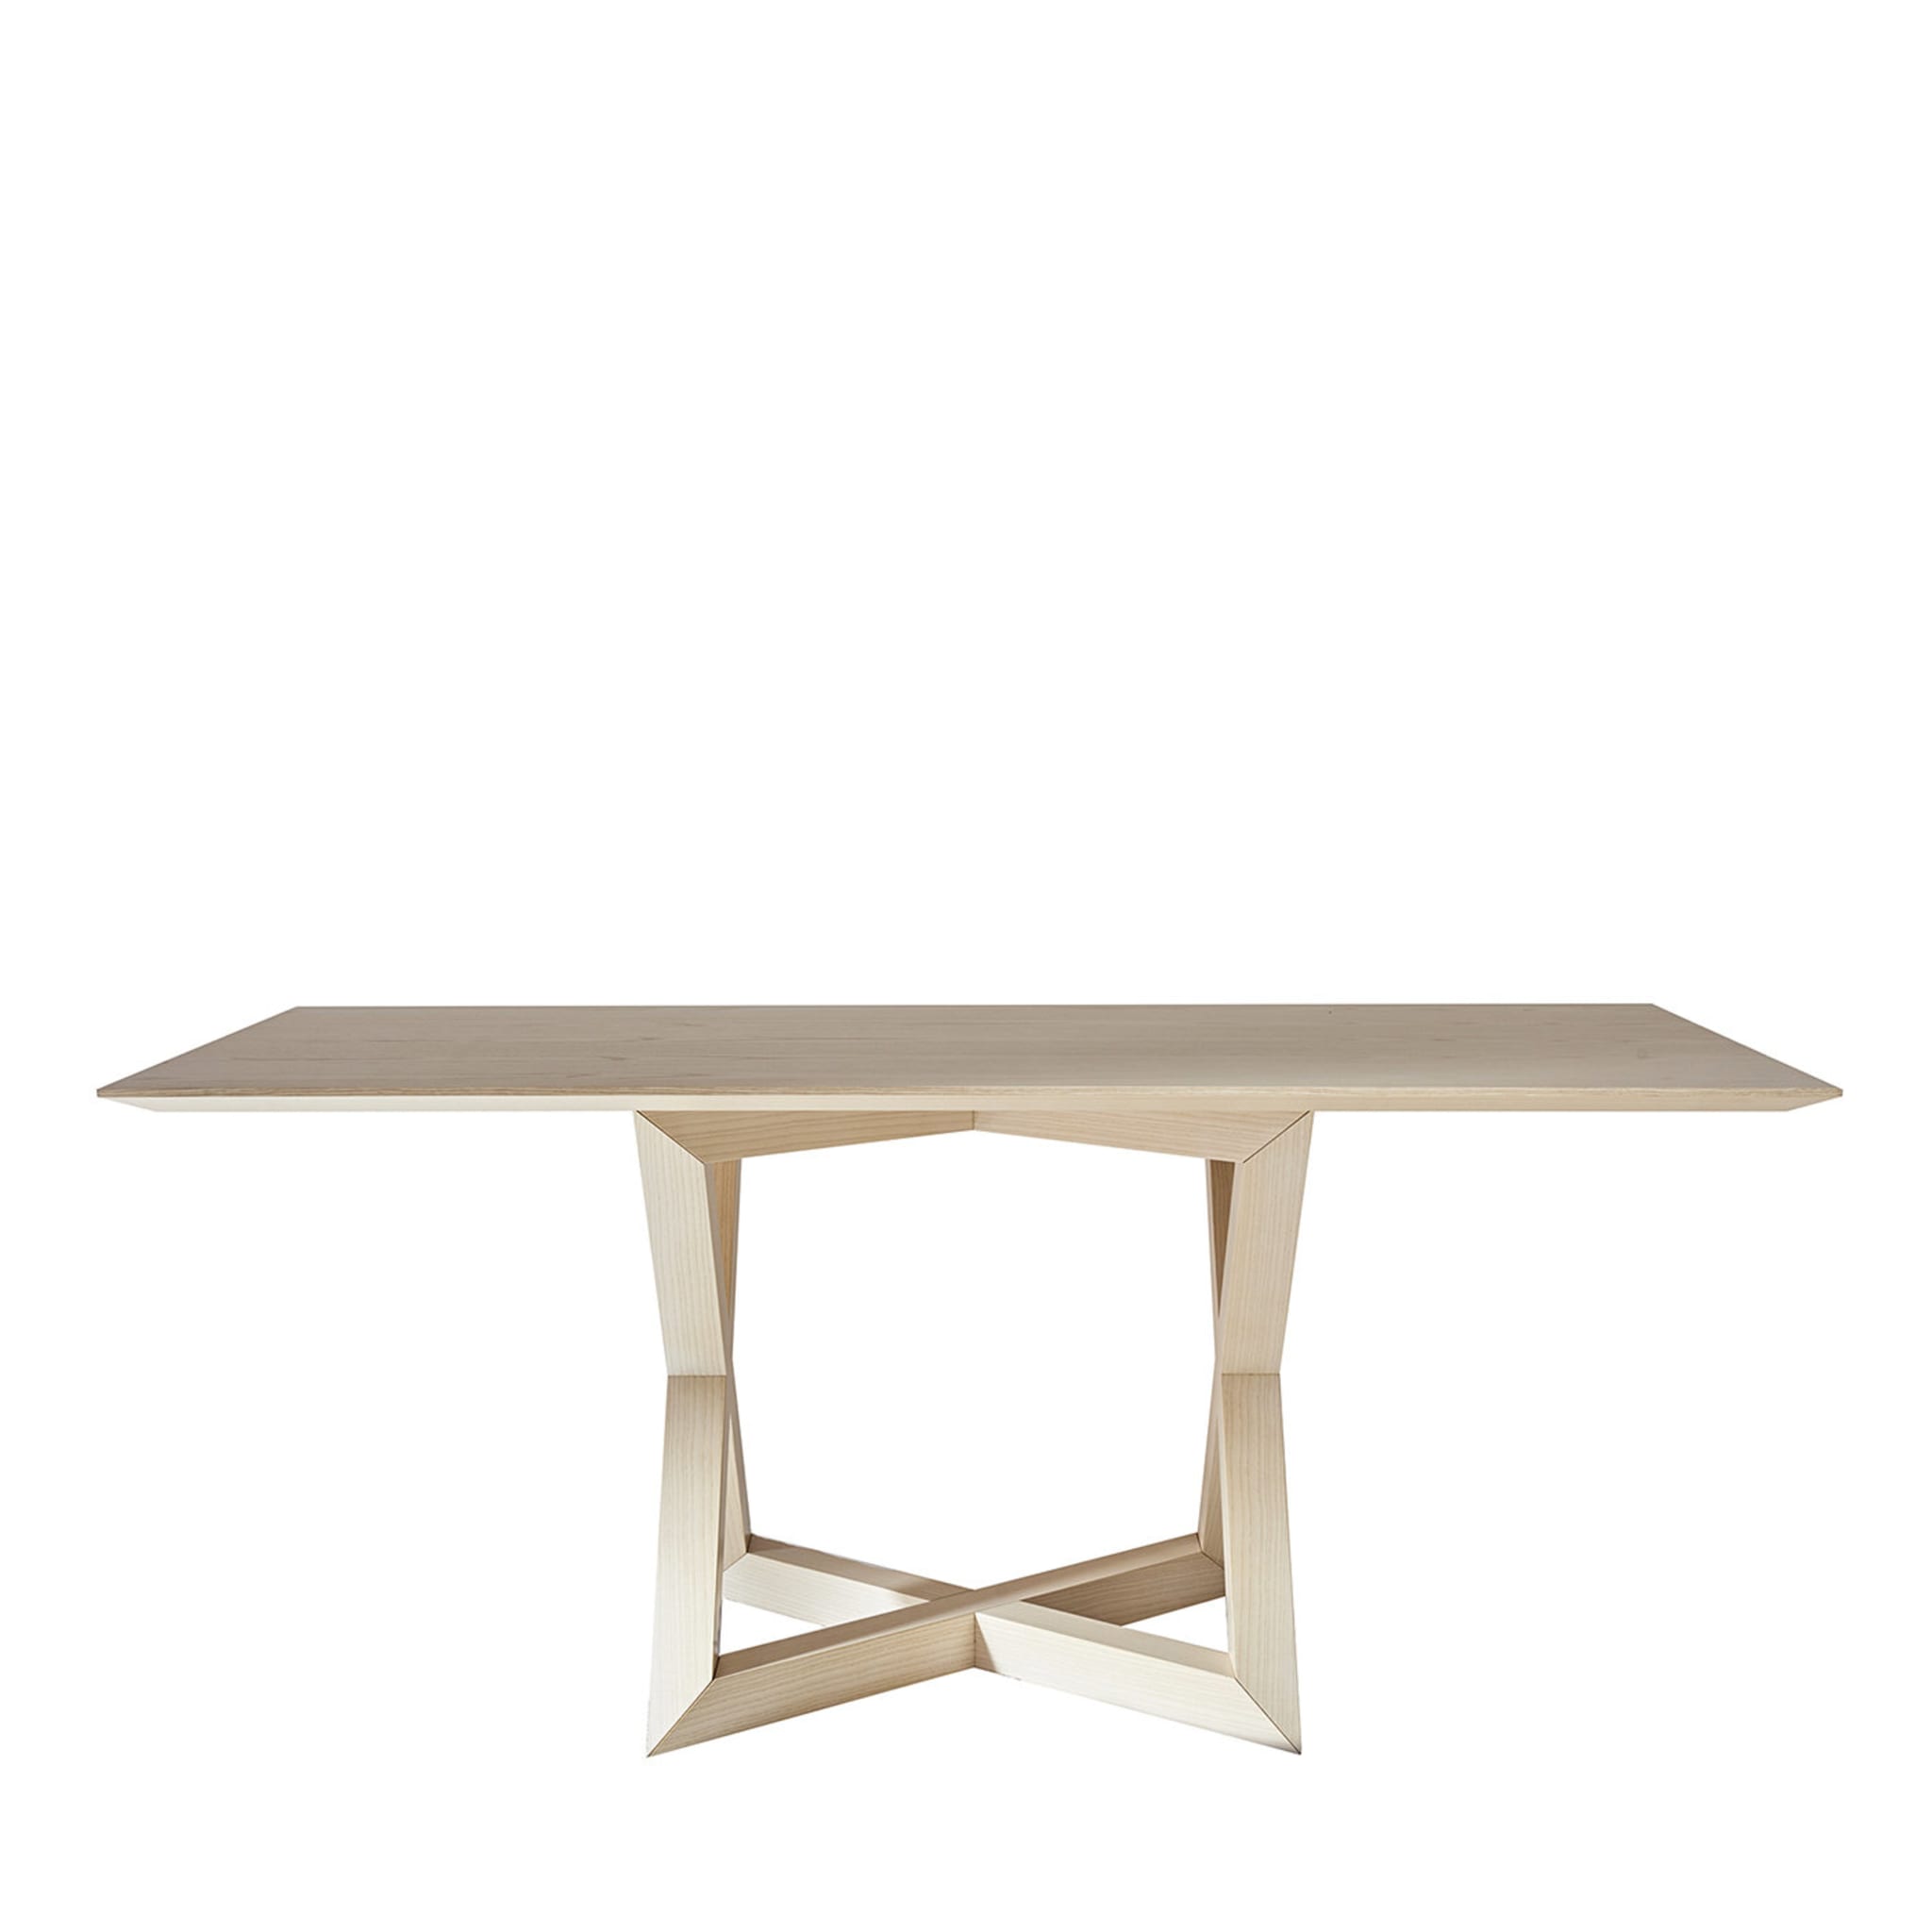 RK Wooden Dining Table by Antonio Saporito - Main view